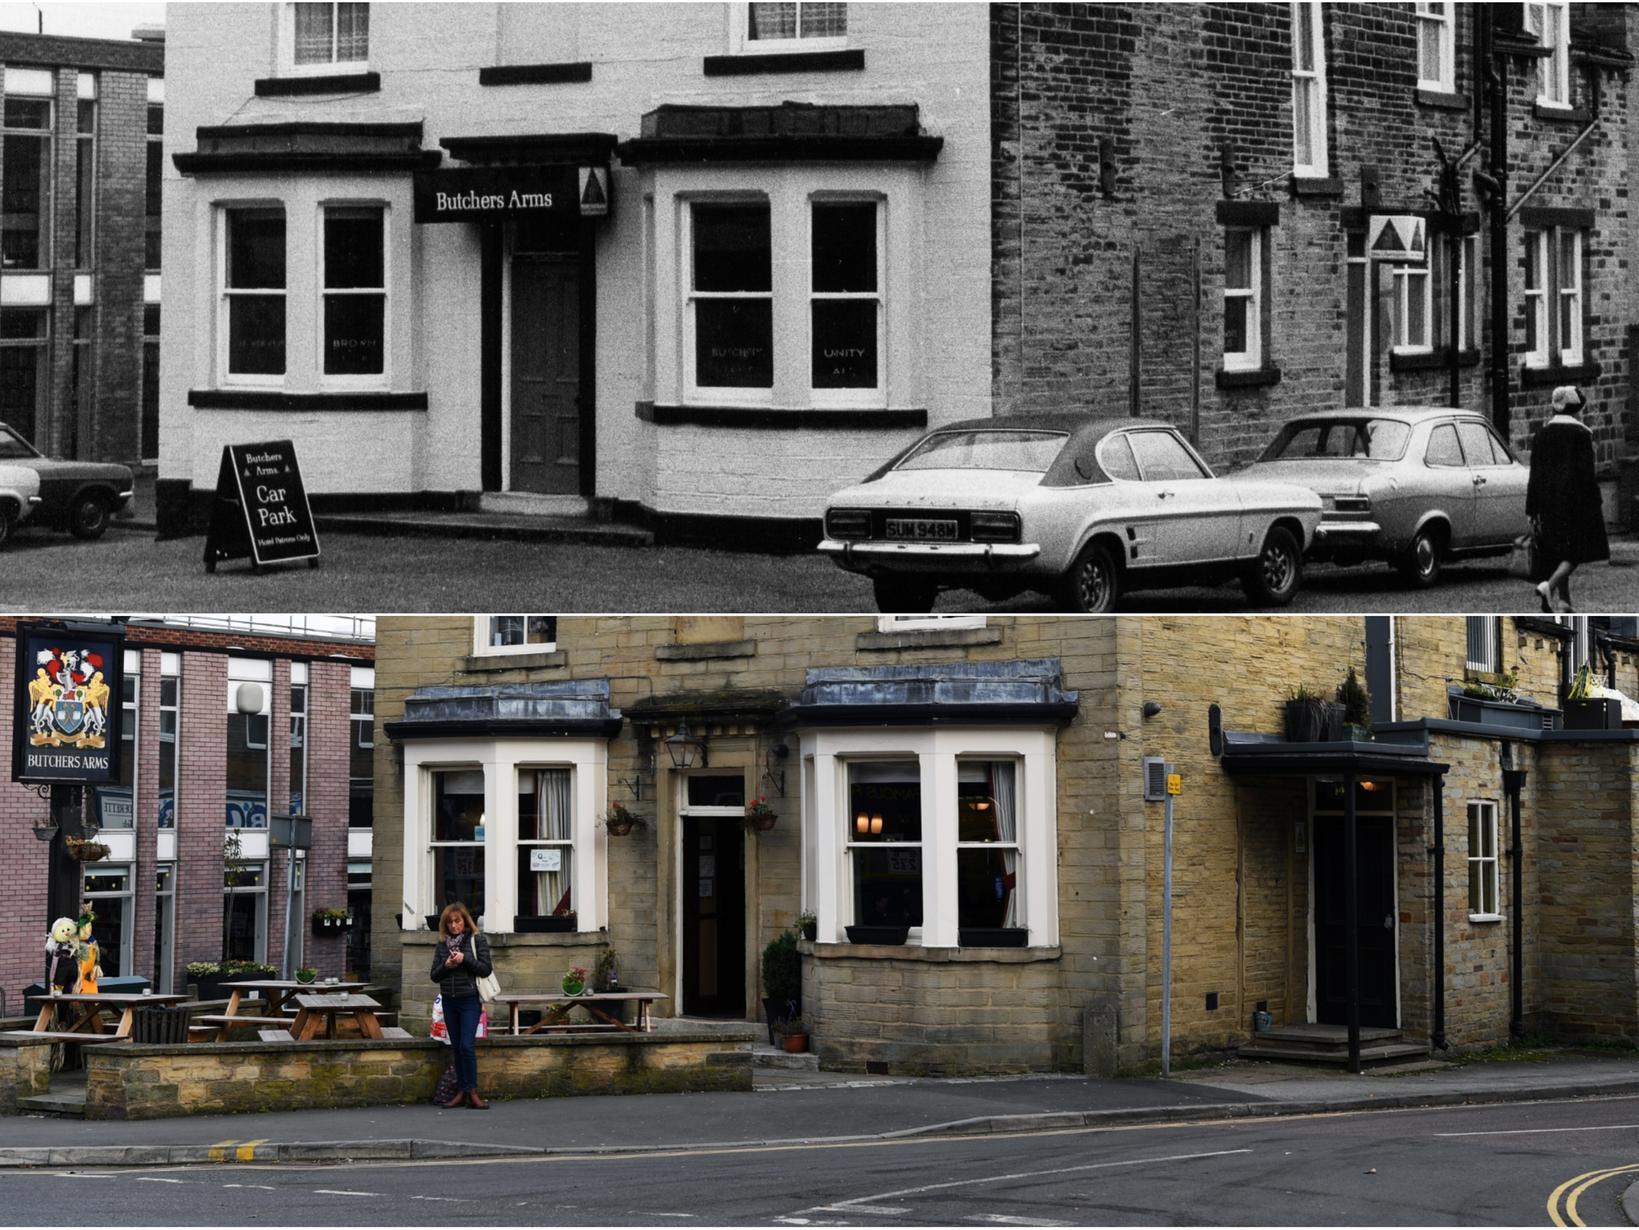 The Butchers Arms pub in the 1980s and in 2019.